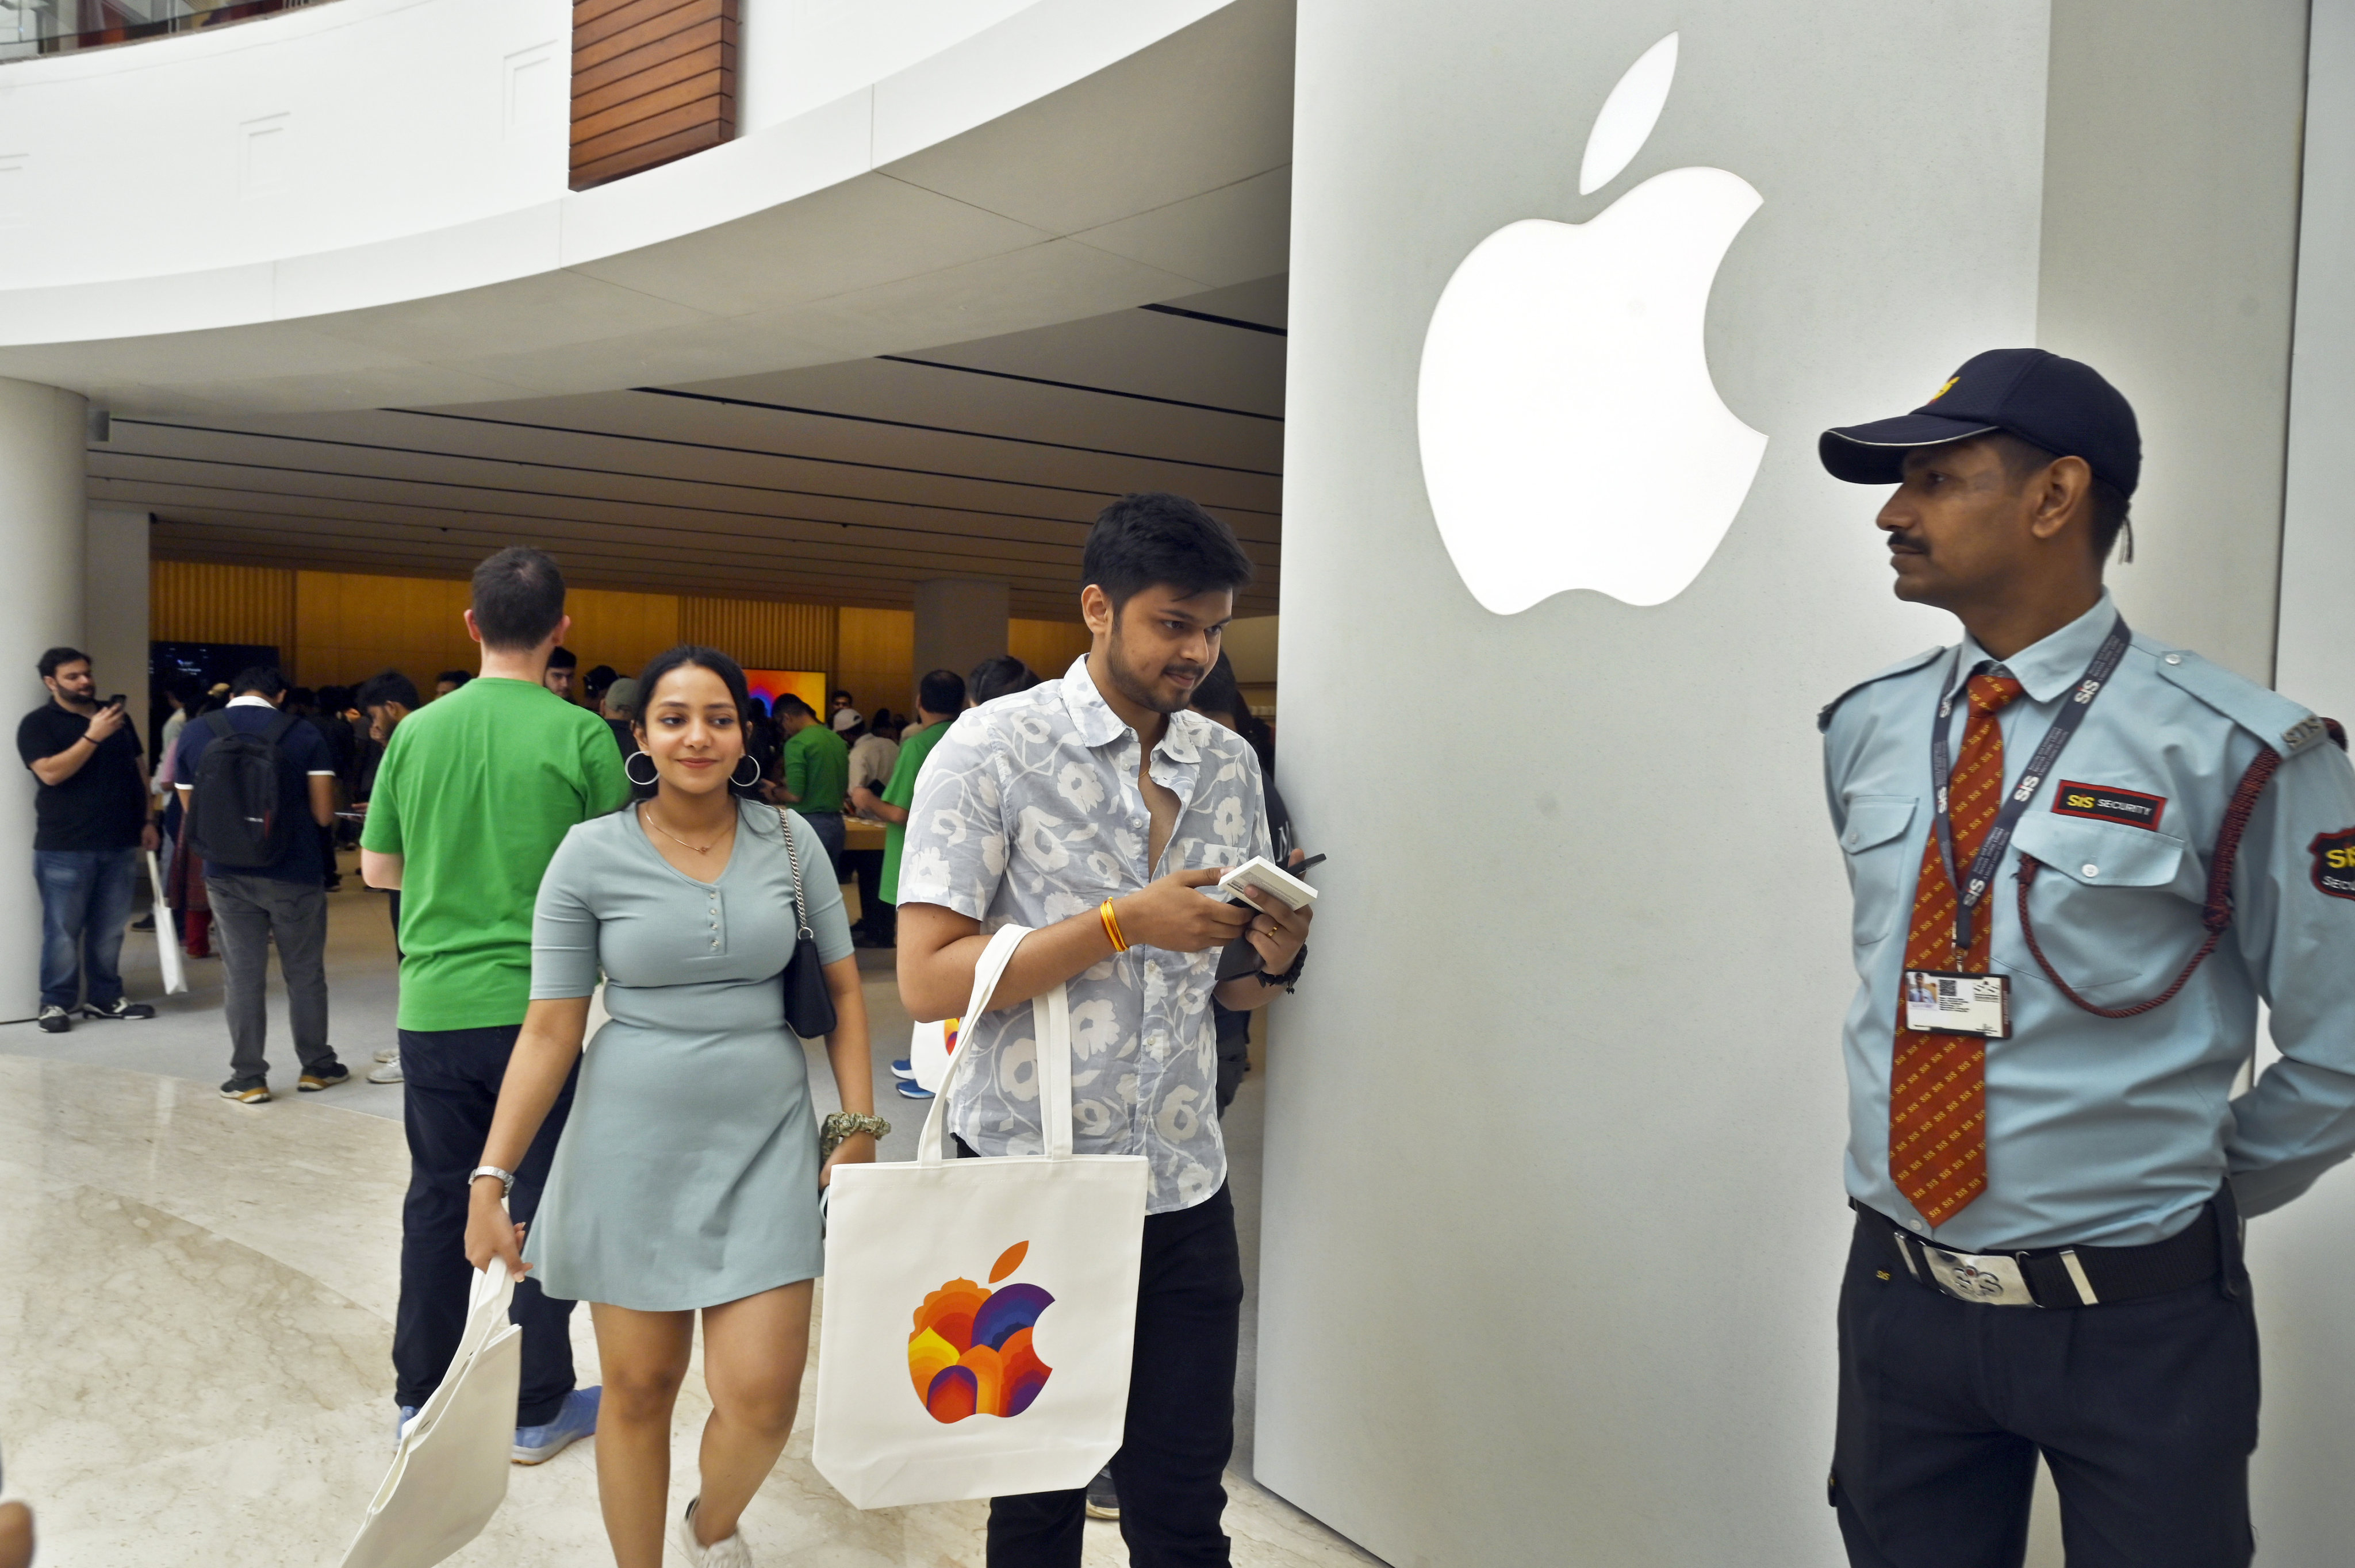 Customers at India’s second Apple retail store, located in New Delhi. Photo: Hindustan Times via Getty Images